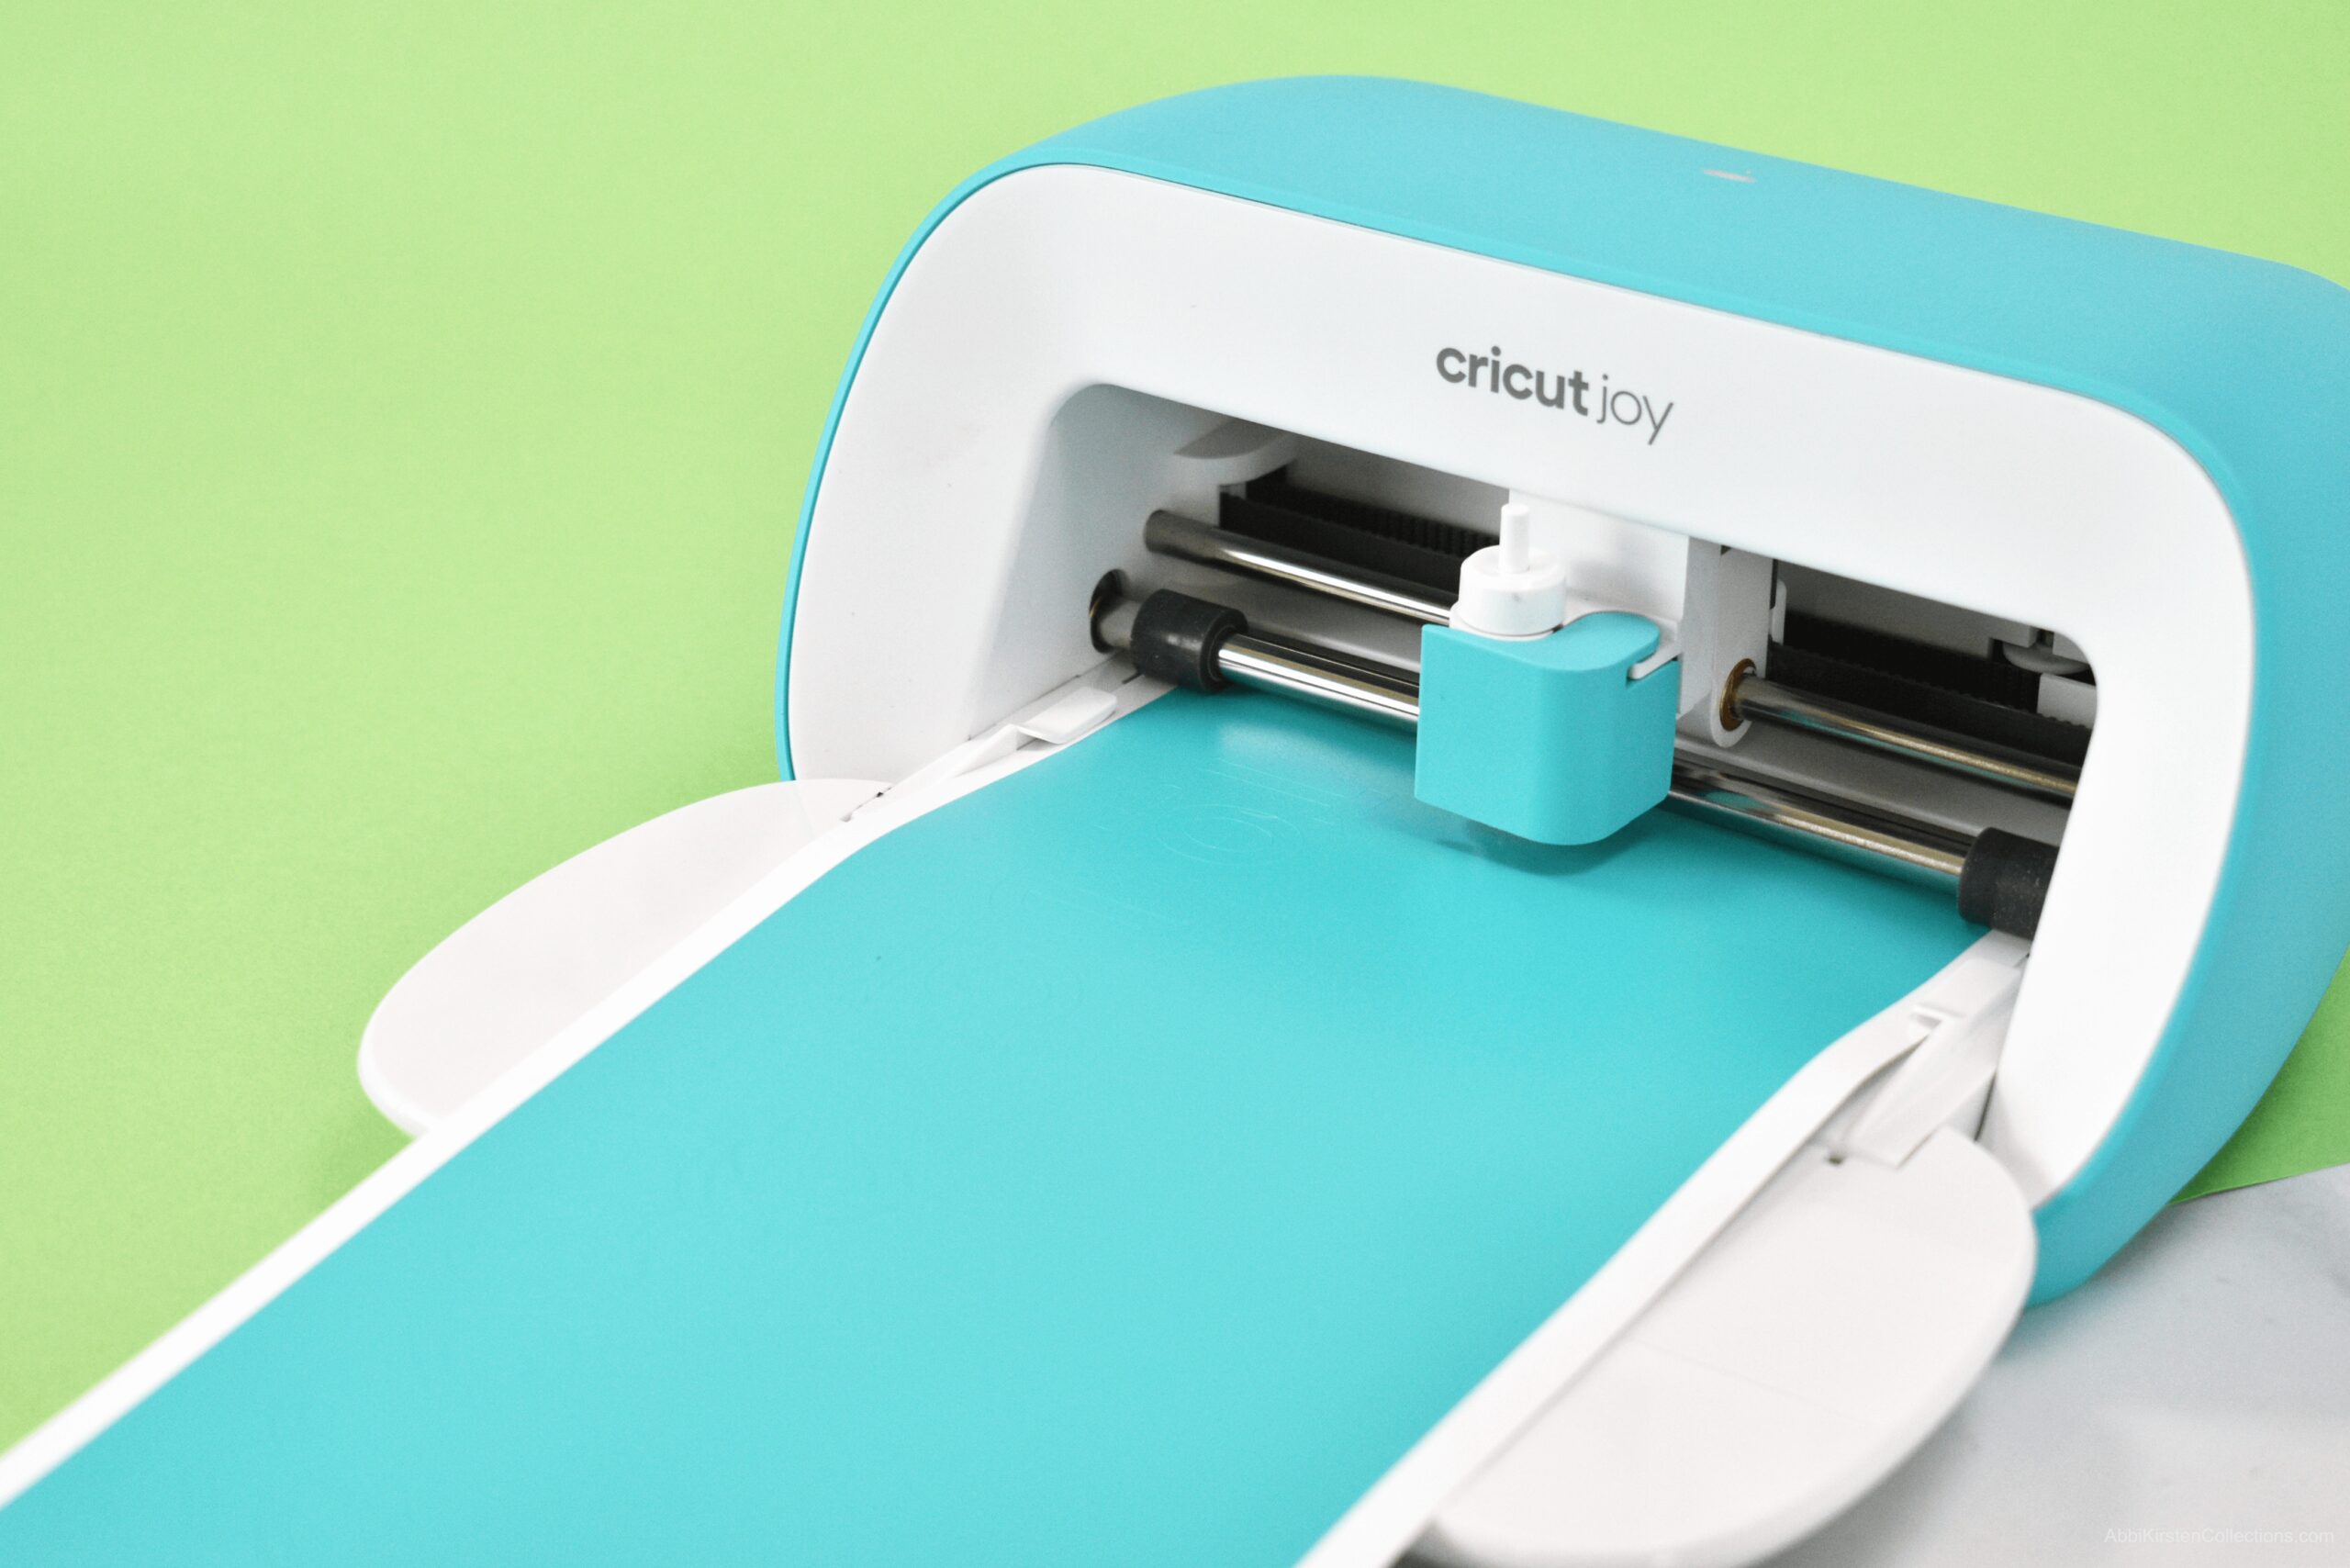 What is the Cricut Joy & what materials does it cut? Full material list  inside!